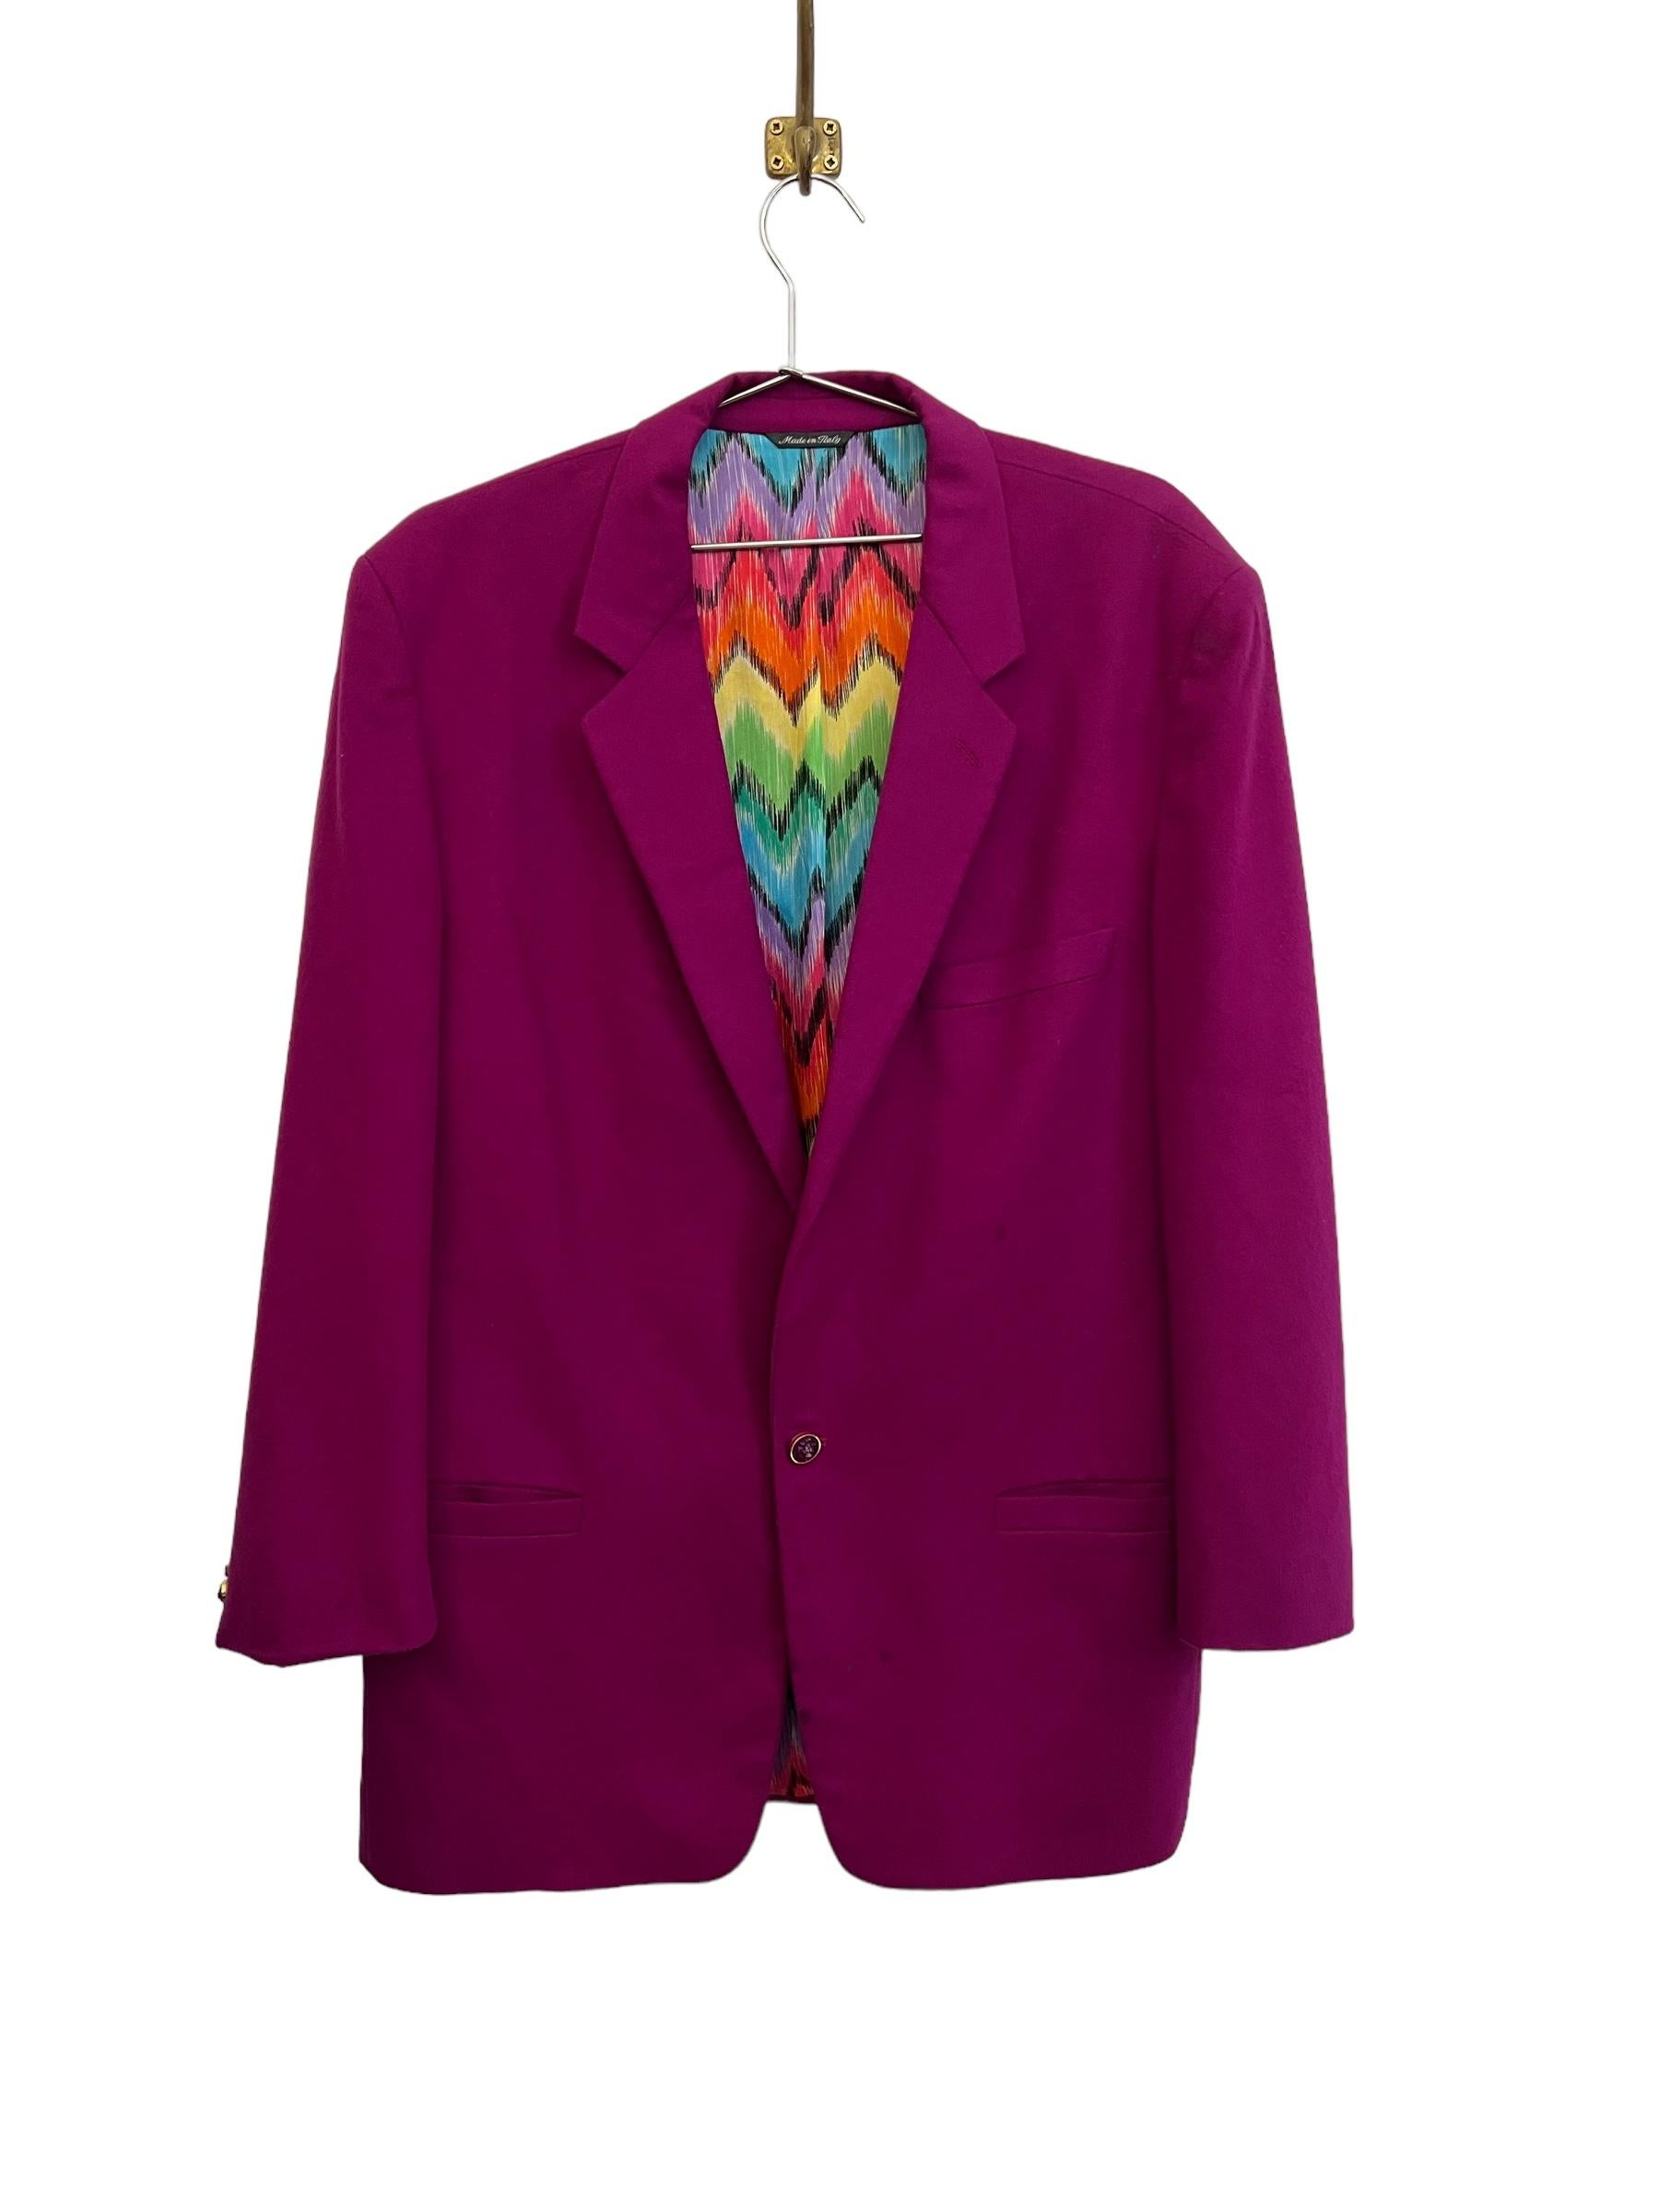 Versus by Gianni Versace Magenta Pink Rainbow Lined Cashmere Blazer Suit Jacket For Sale 6